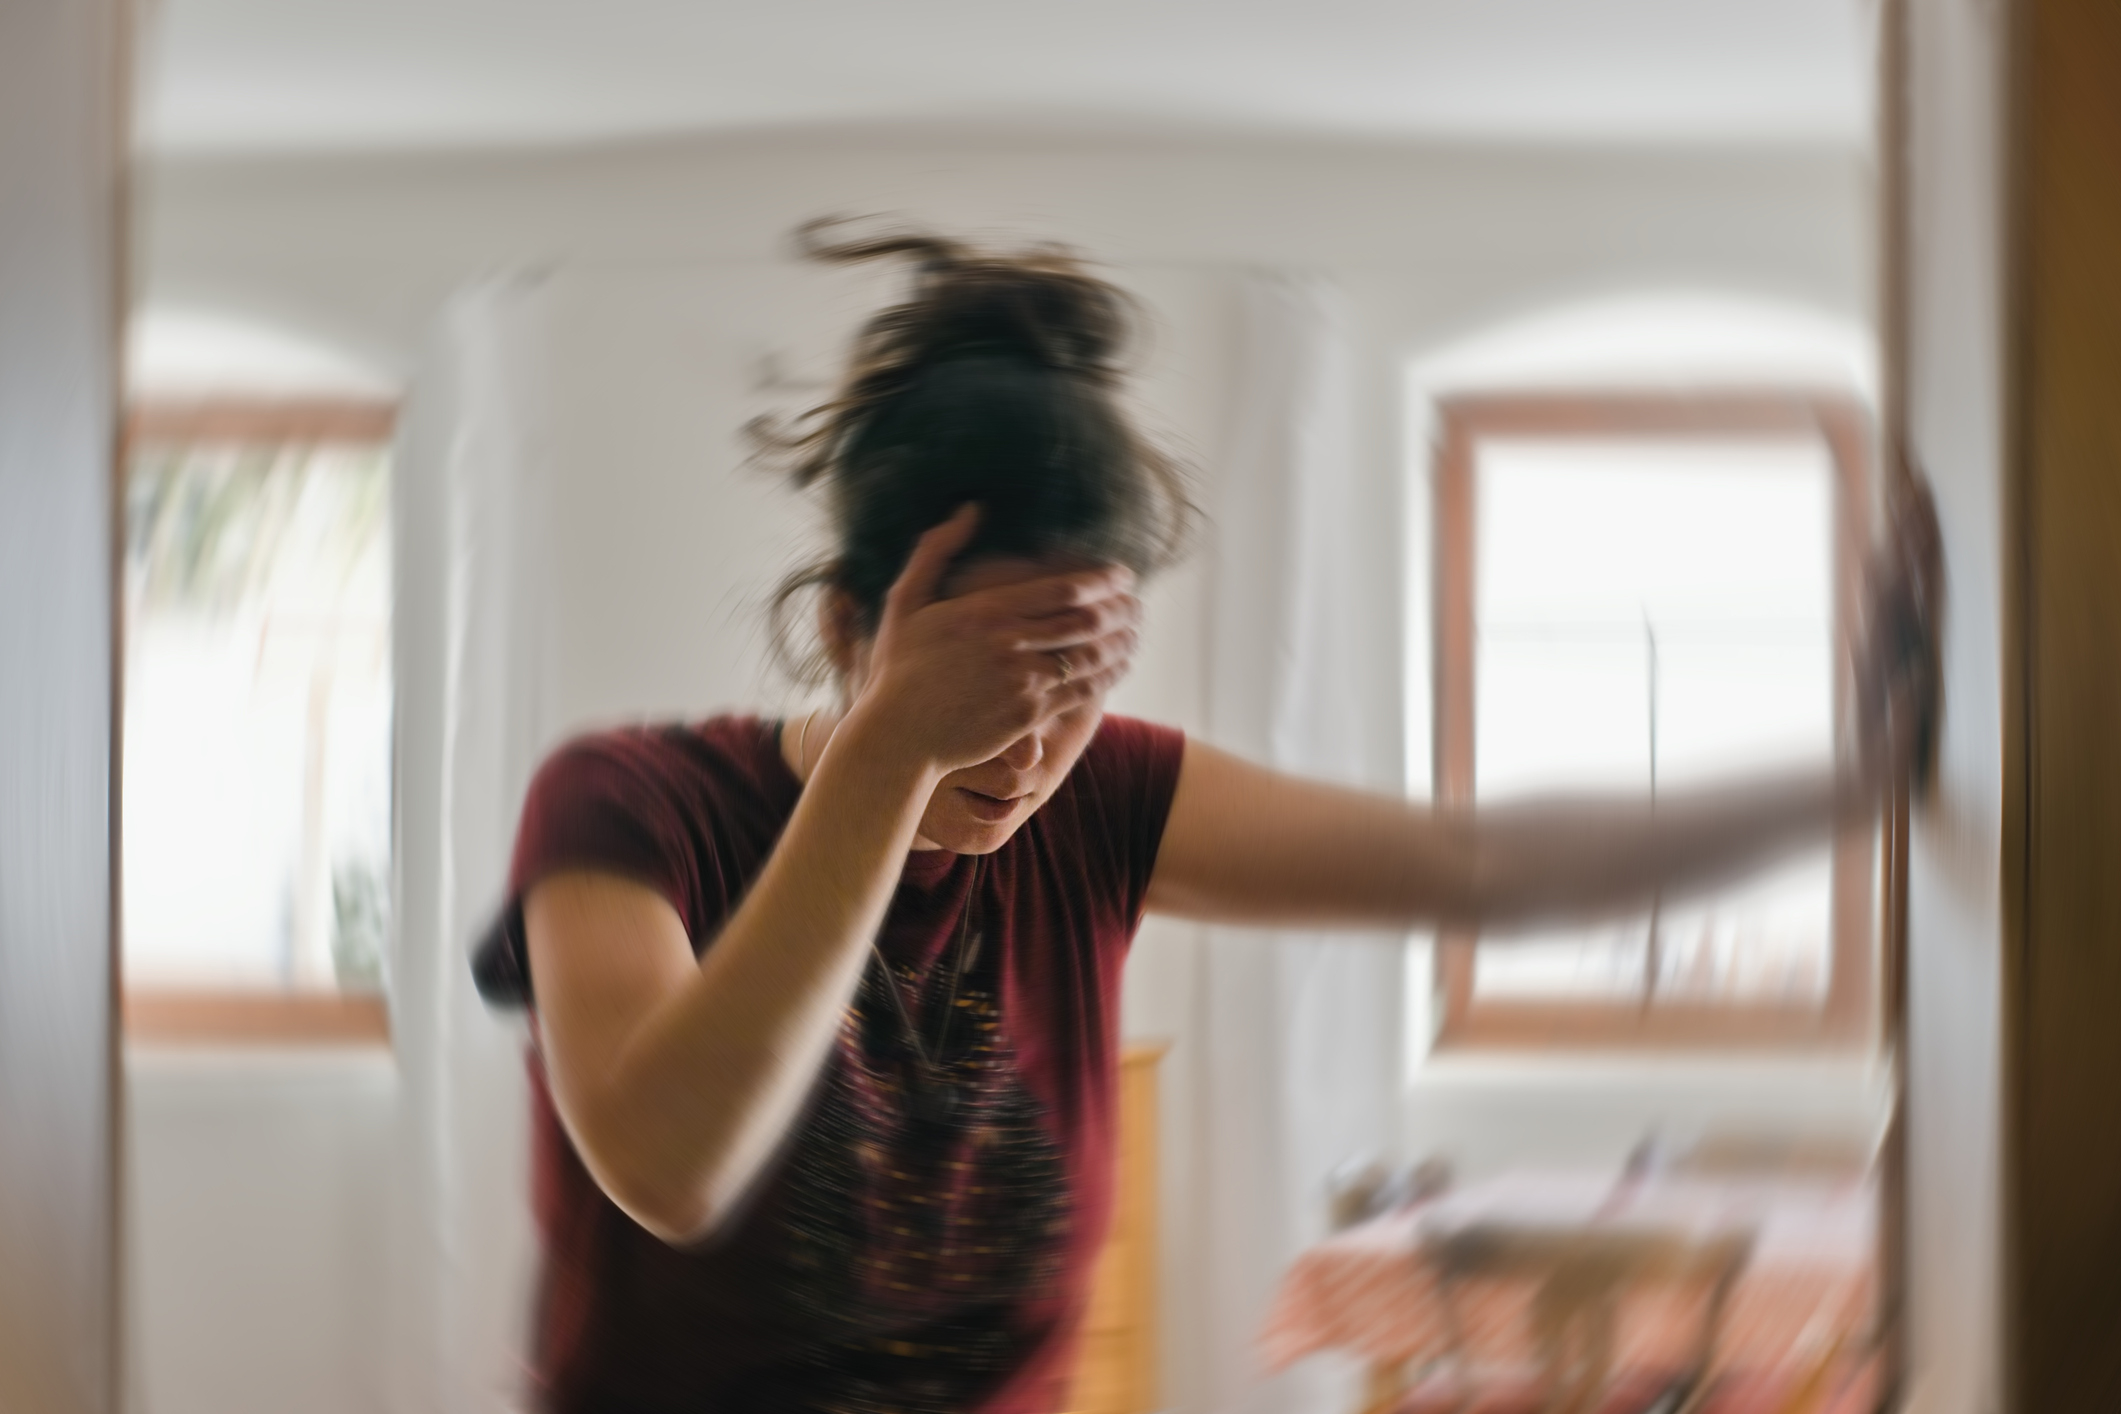 A person holding their head in pain, standing in a blurred room, looking distressed